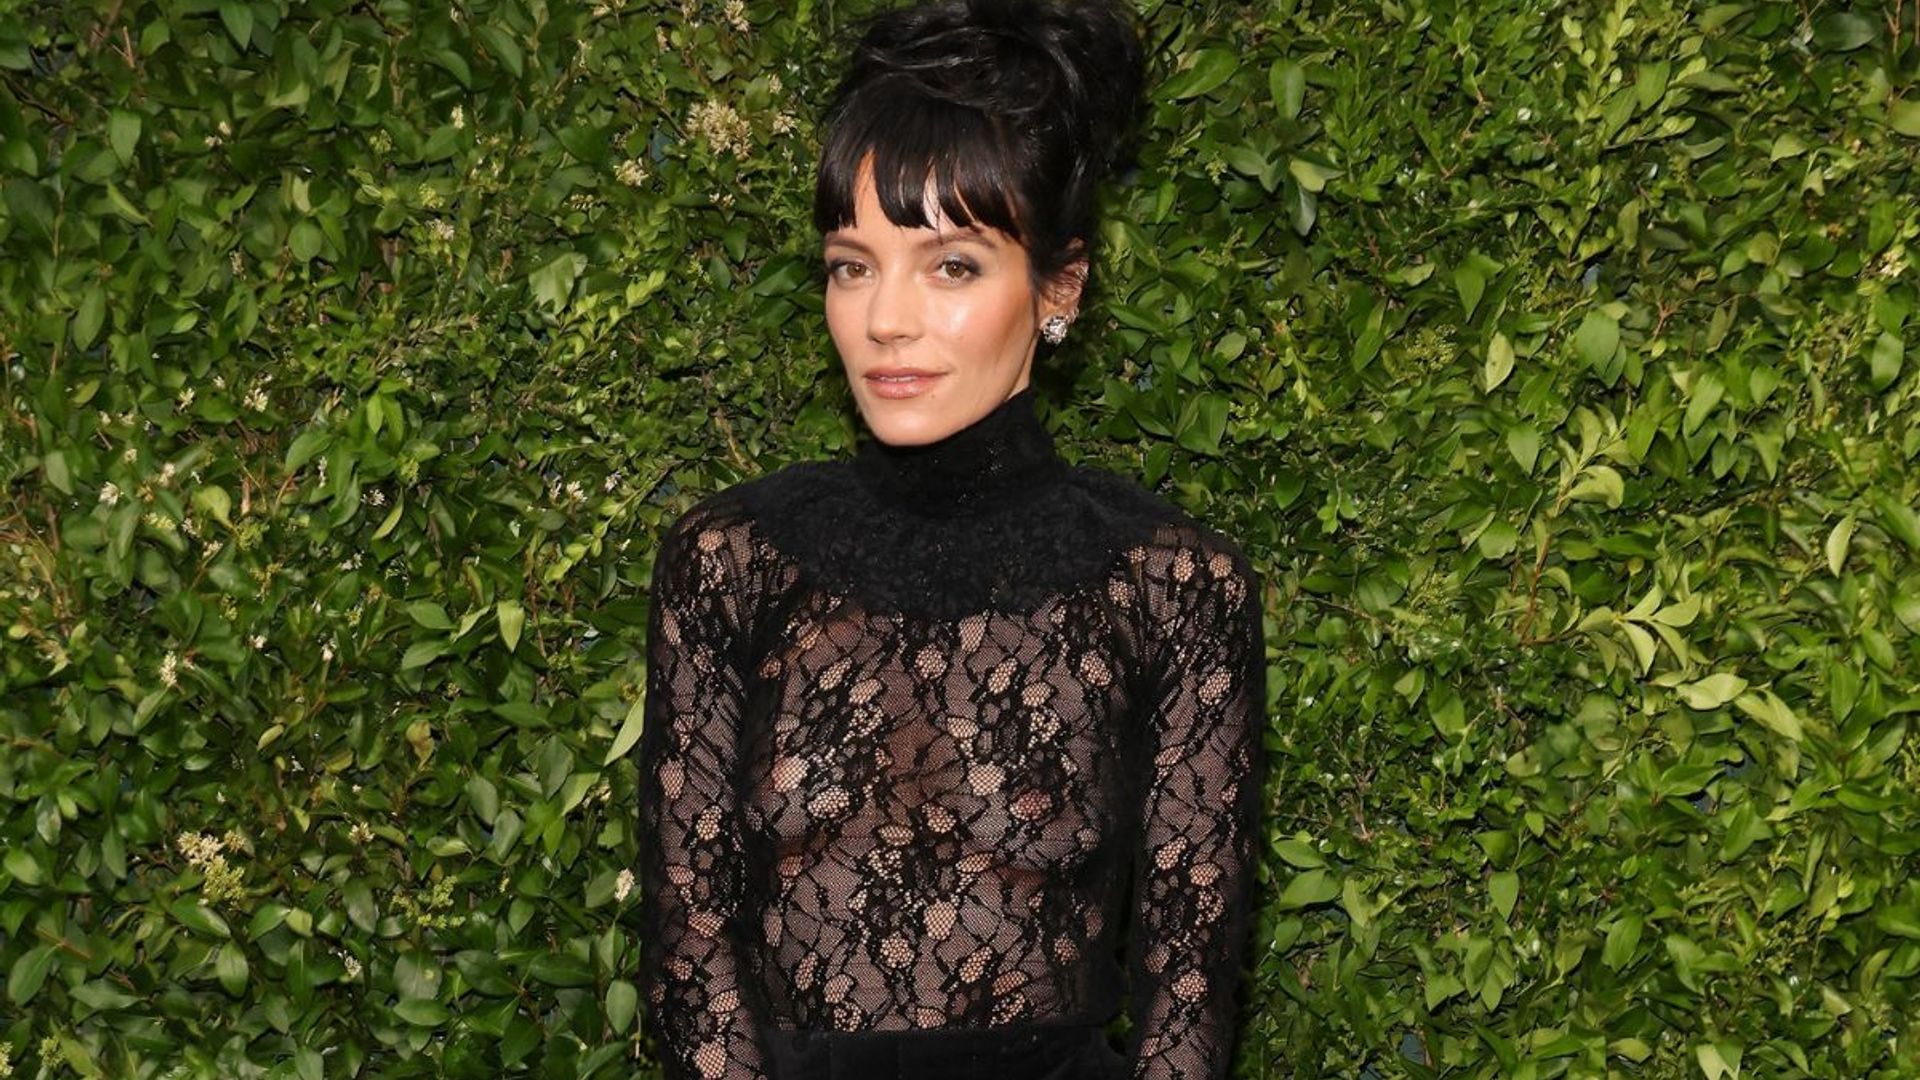 Lily Allen wears show-stopping sheer blouse to Chanel dinner